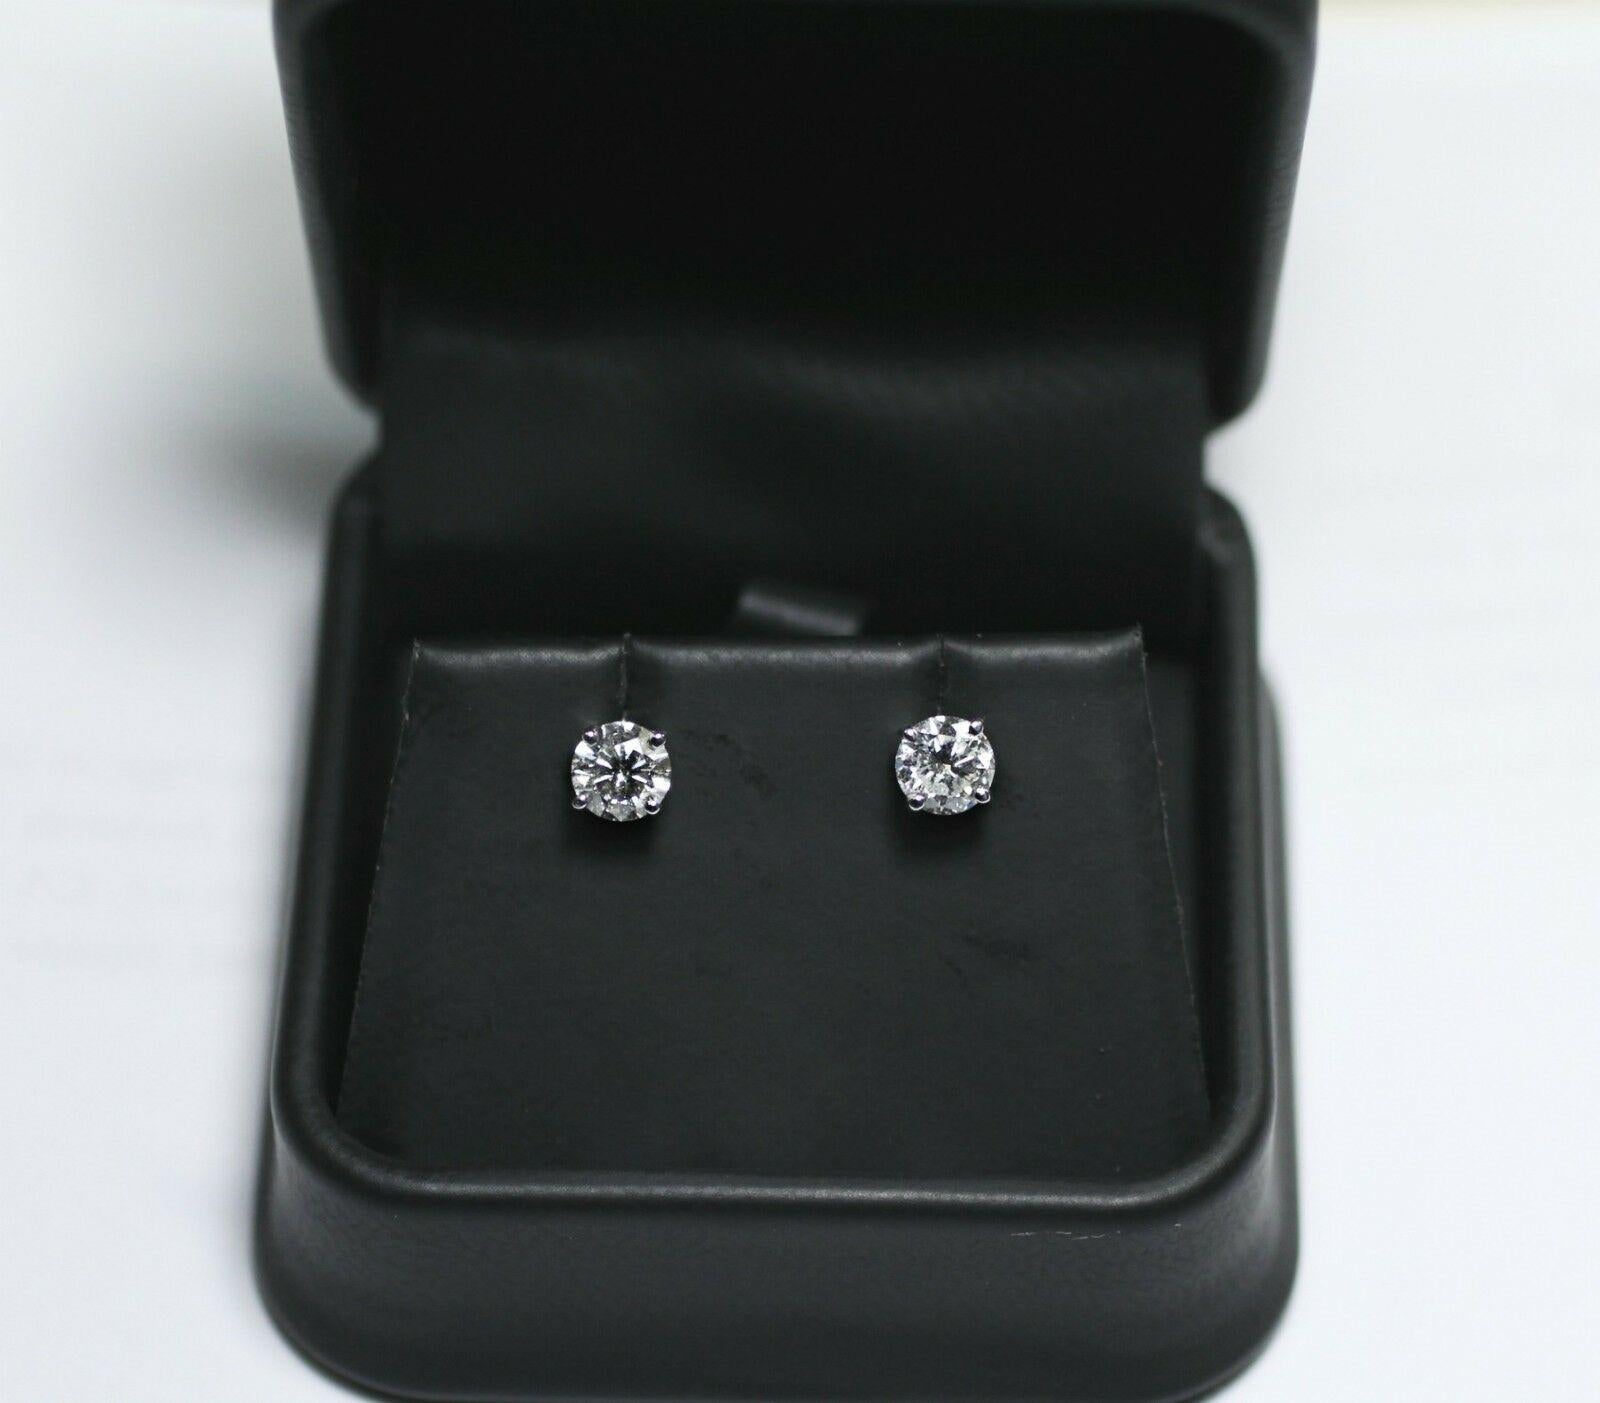 Diamond Specifications
Main Stone:  
Shape:  Round  
Carat Total Weight:   1.15Ctw
Color:    EF 
Clarity: SI3 
Jewelry Specifications
Brand:Custom
Metal: 14K White Gold
Type: 4 prong stud earrings
                                              